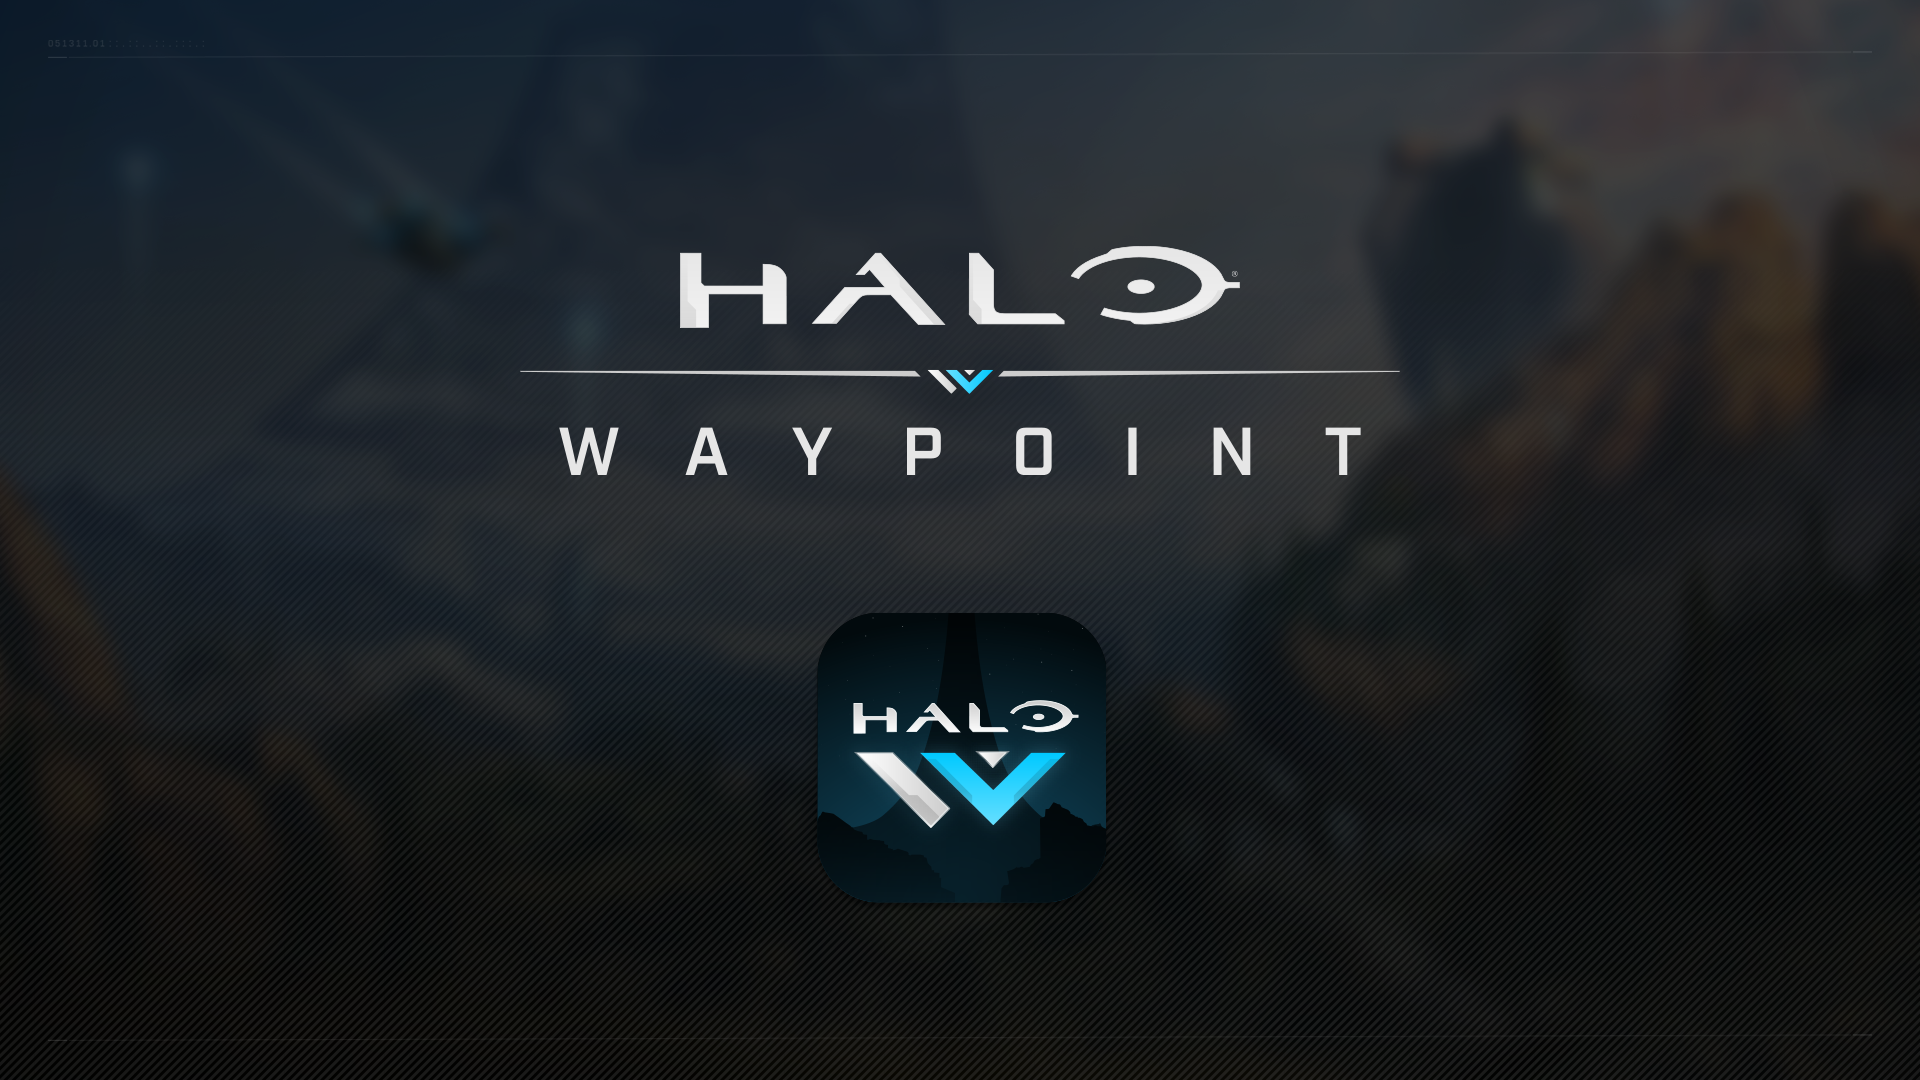 Header image of the Halo Waypoint app